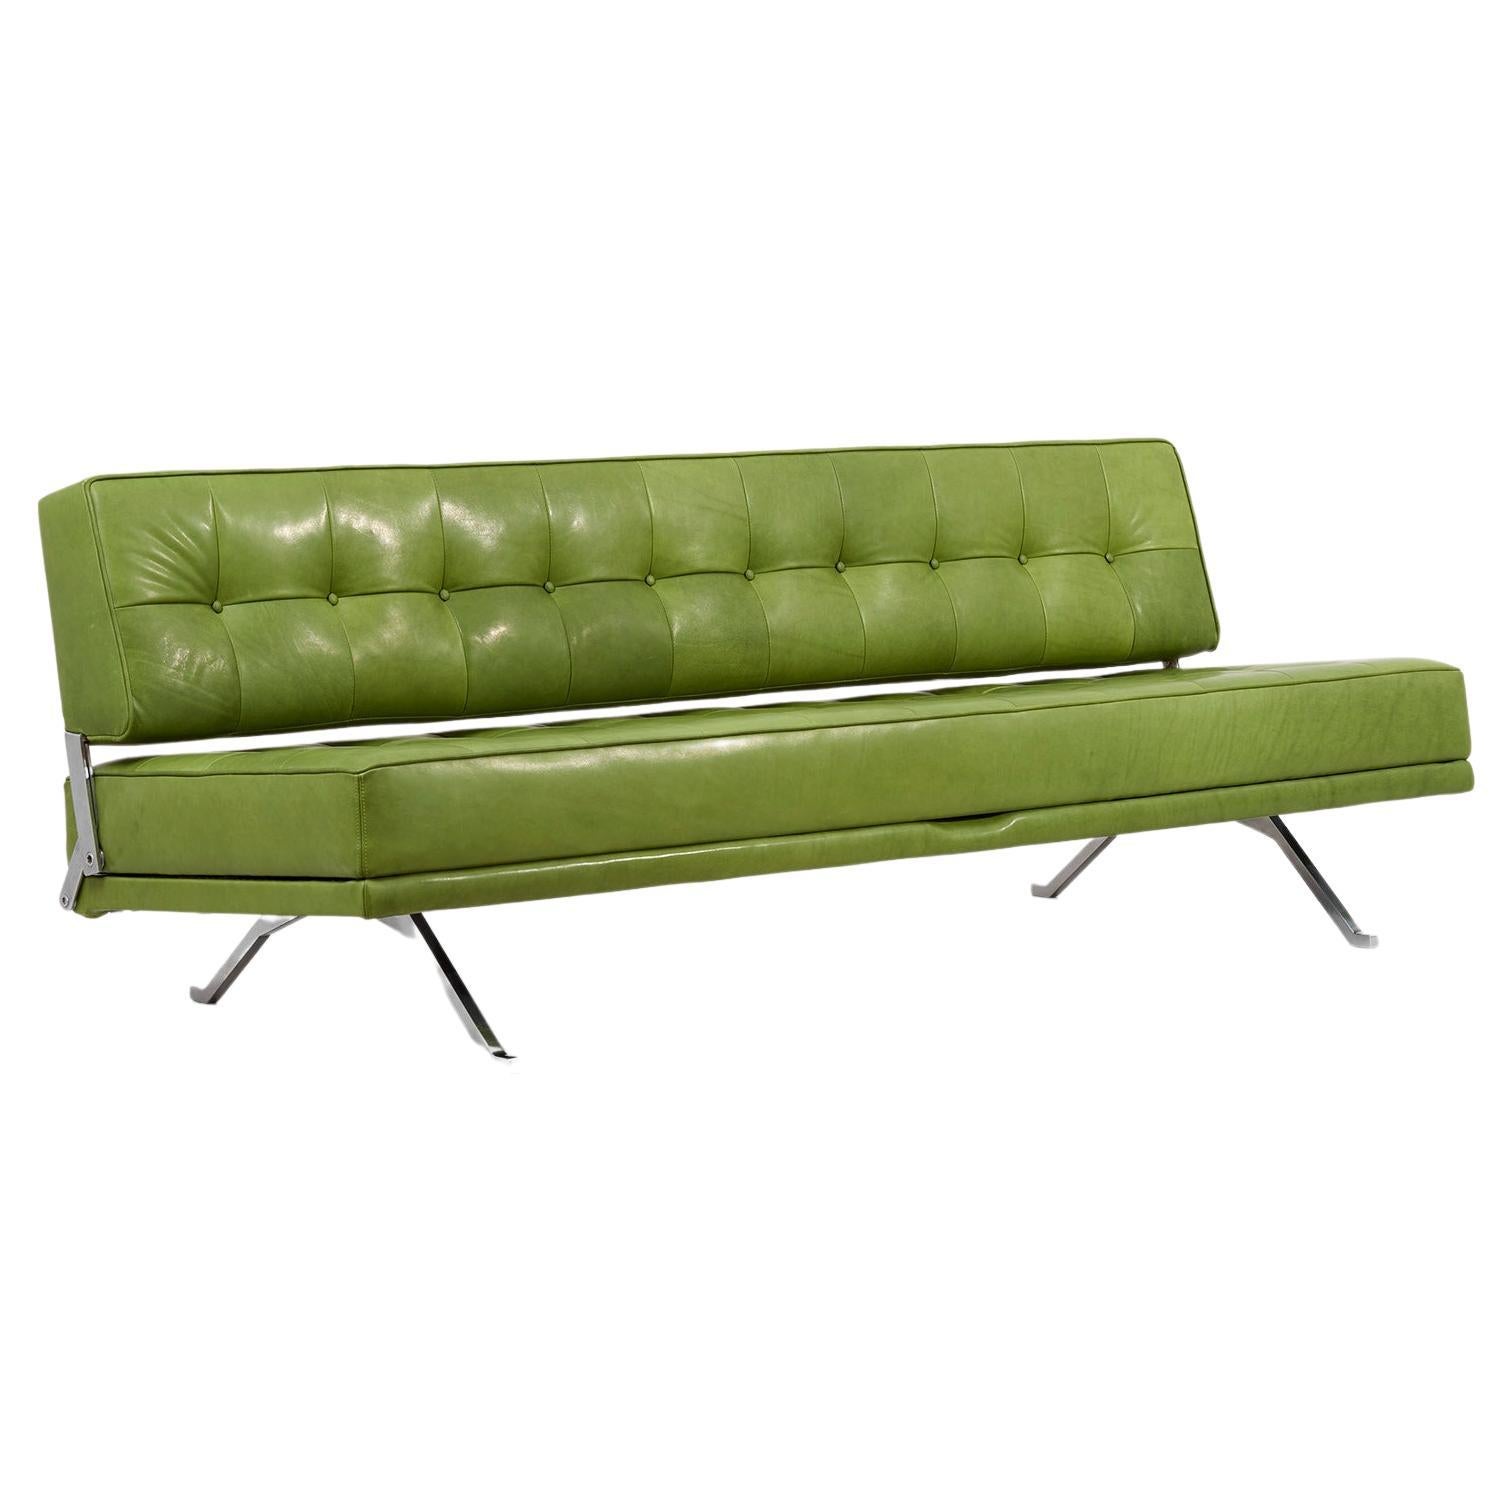 Reupholstered Johannes Spalt Sofa Daybed for Wittmann, 1960s in green leather  For Sale